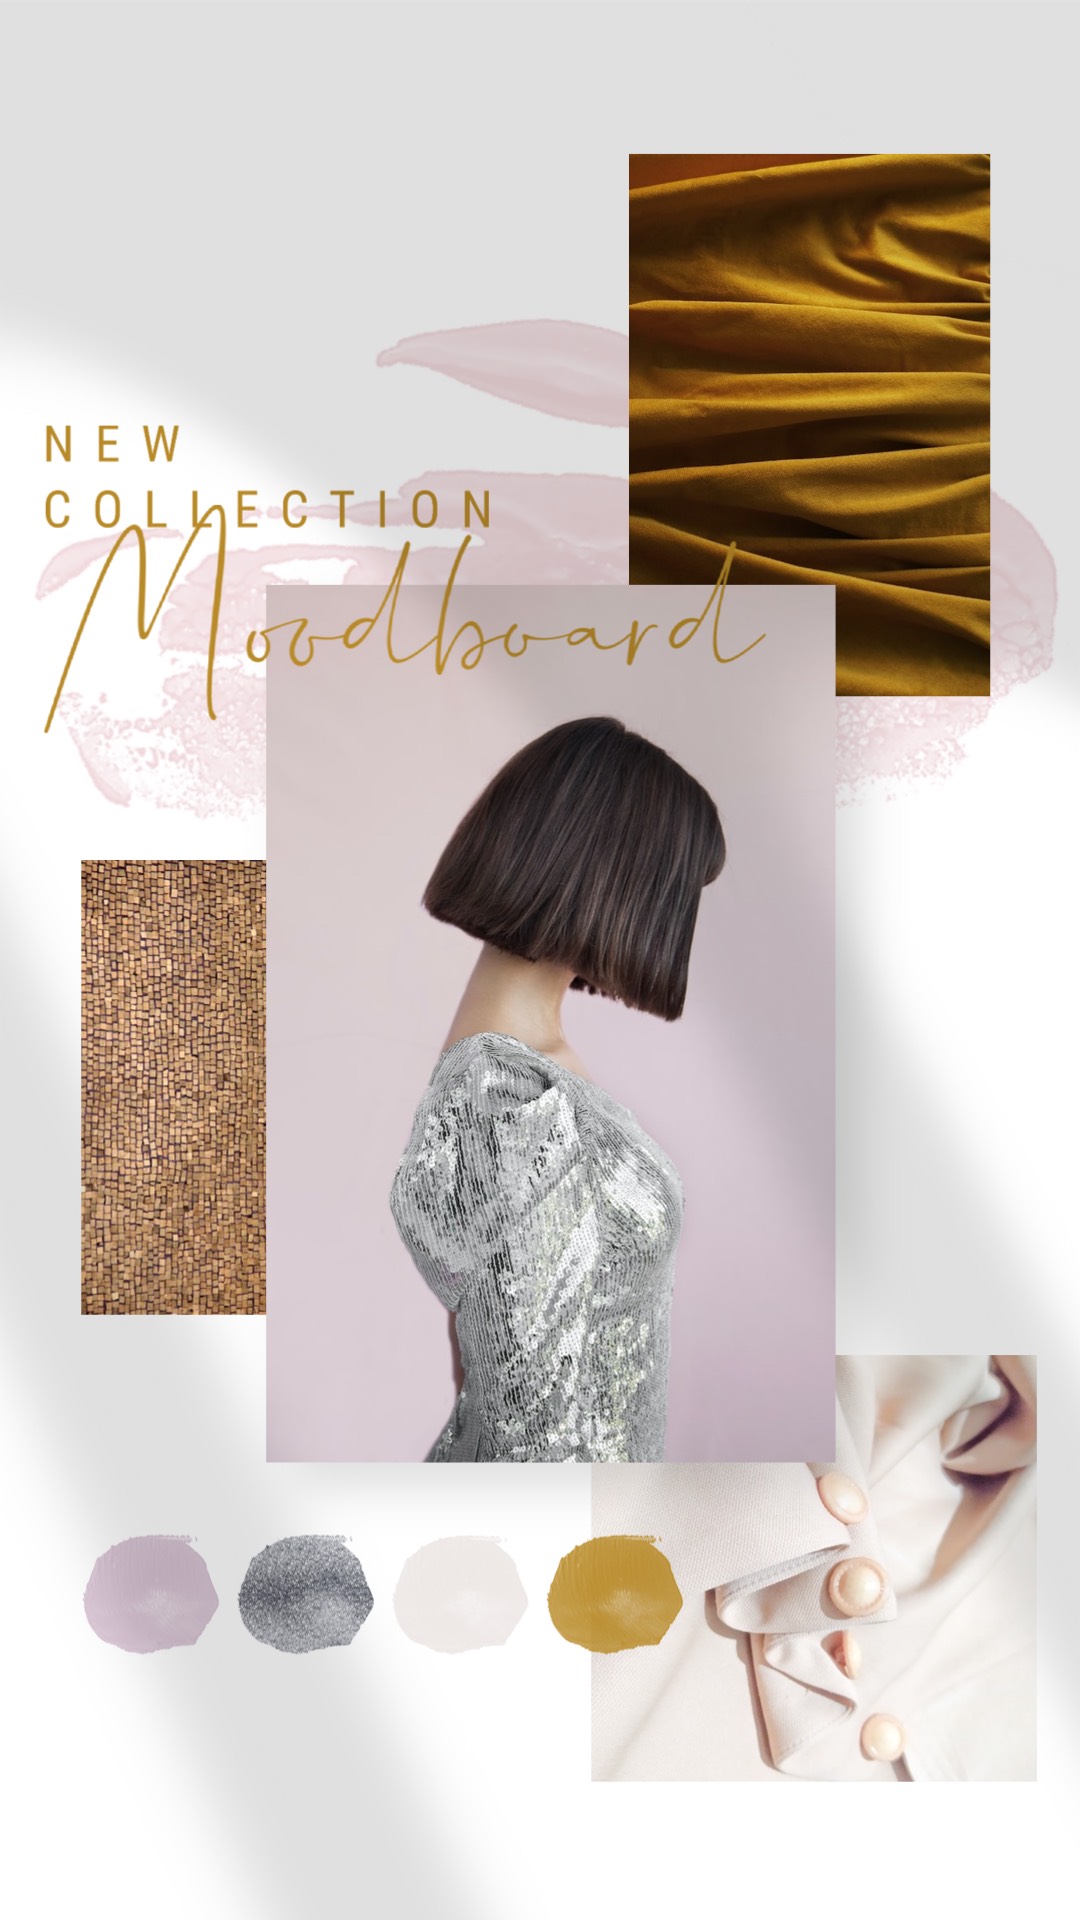 fashion collection design inspiration moodboard Instagram story template